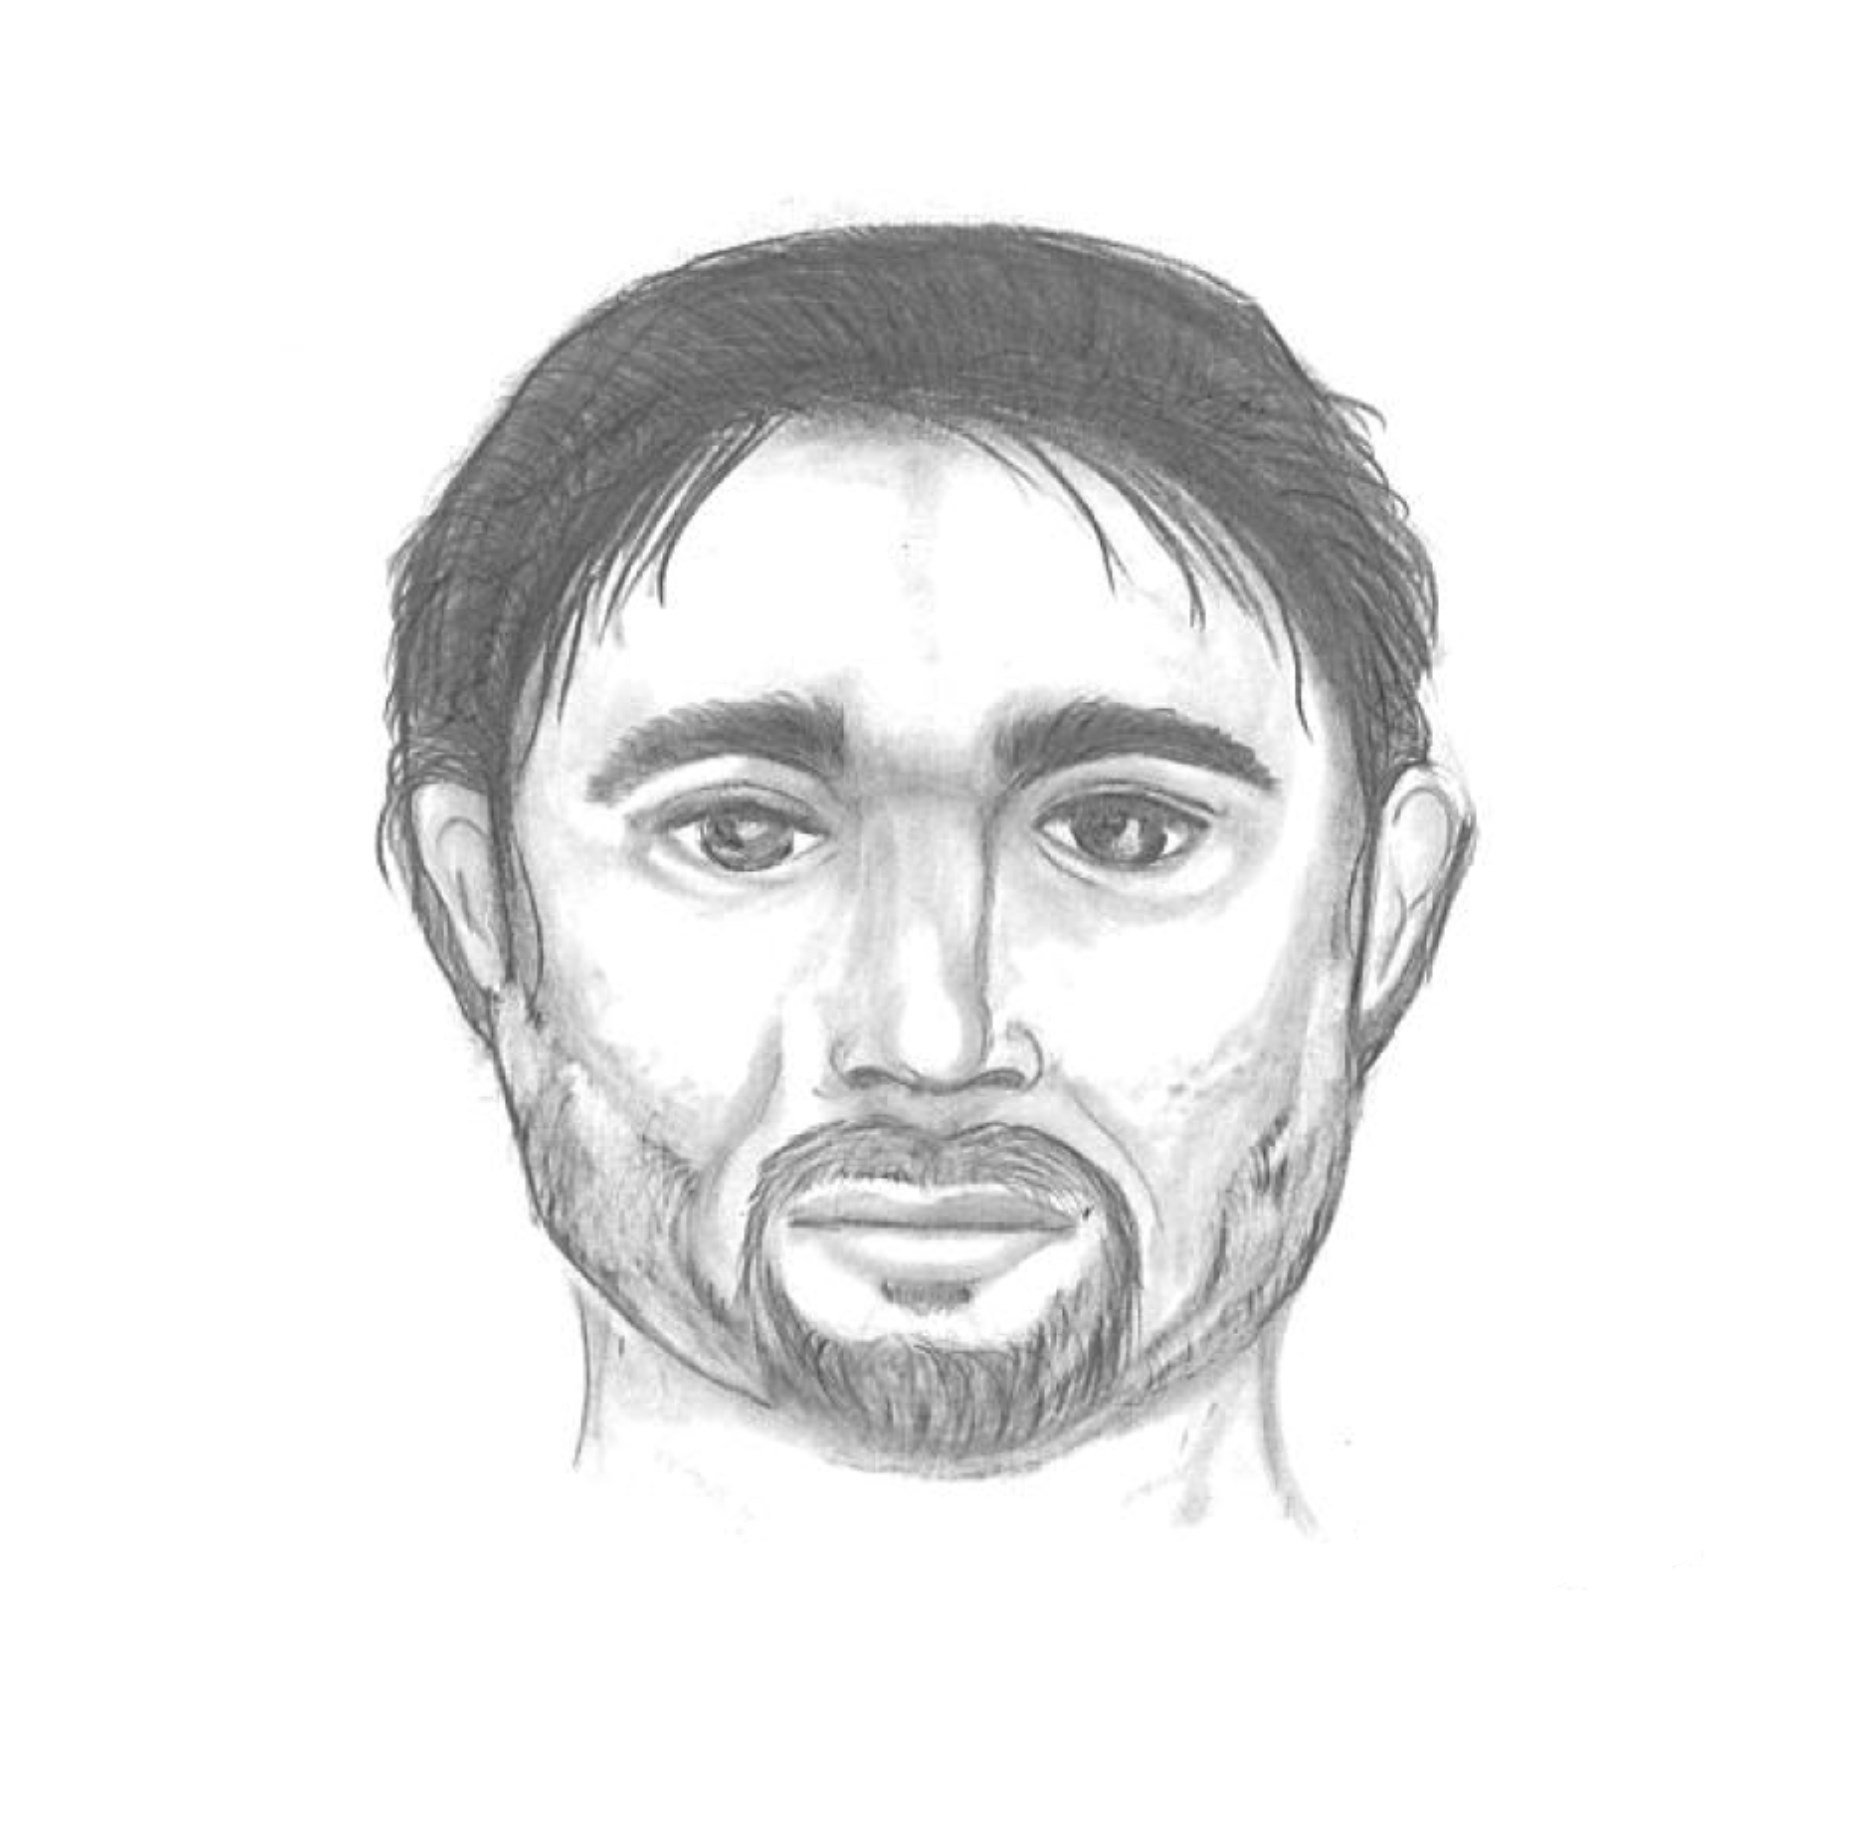 Police released a sketch of the man wanted in connection with an attempted sexual assault near UK's campus.